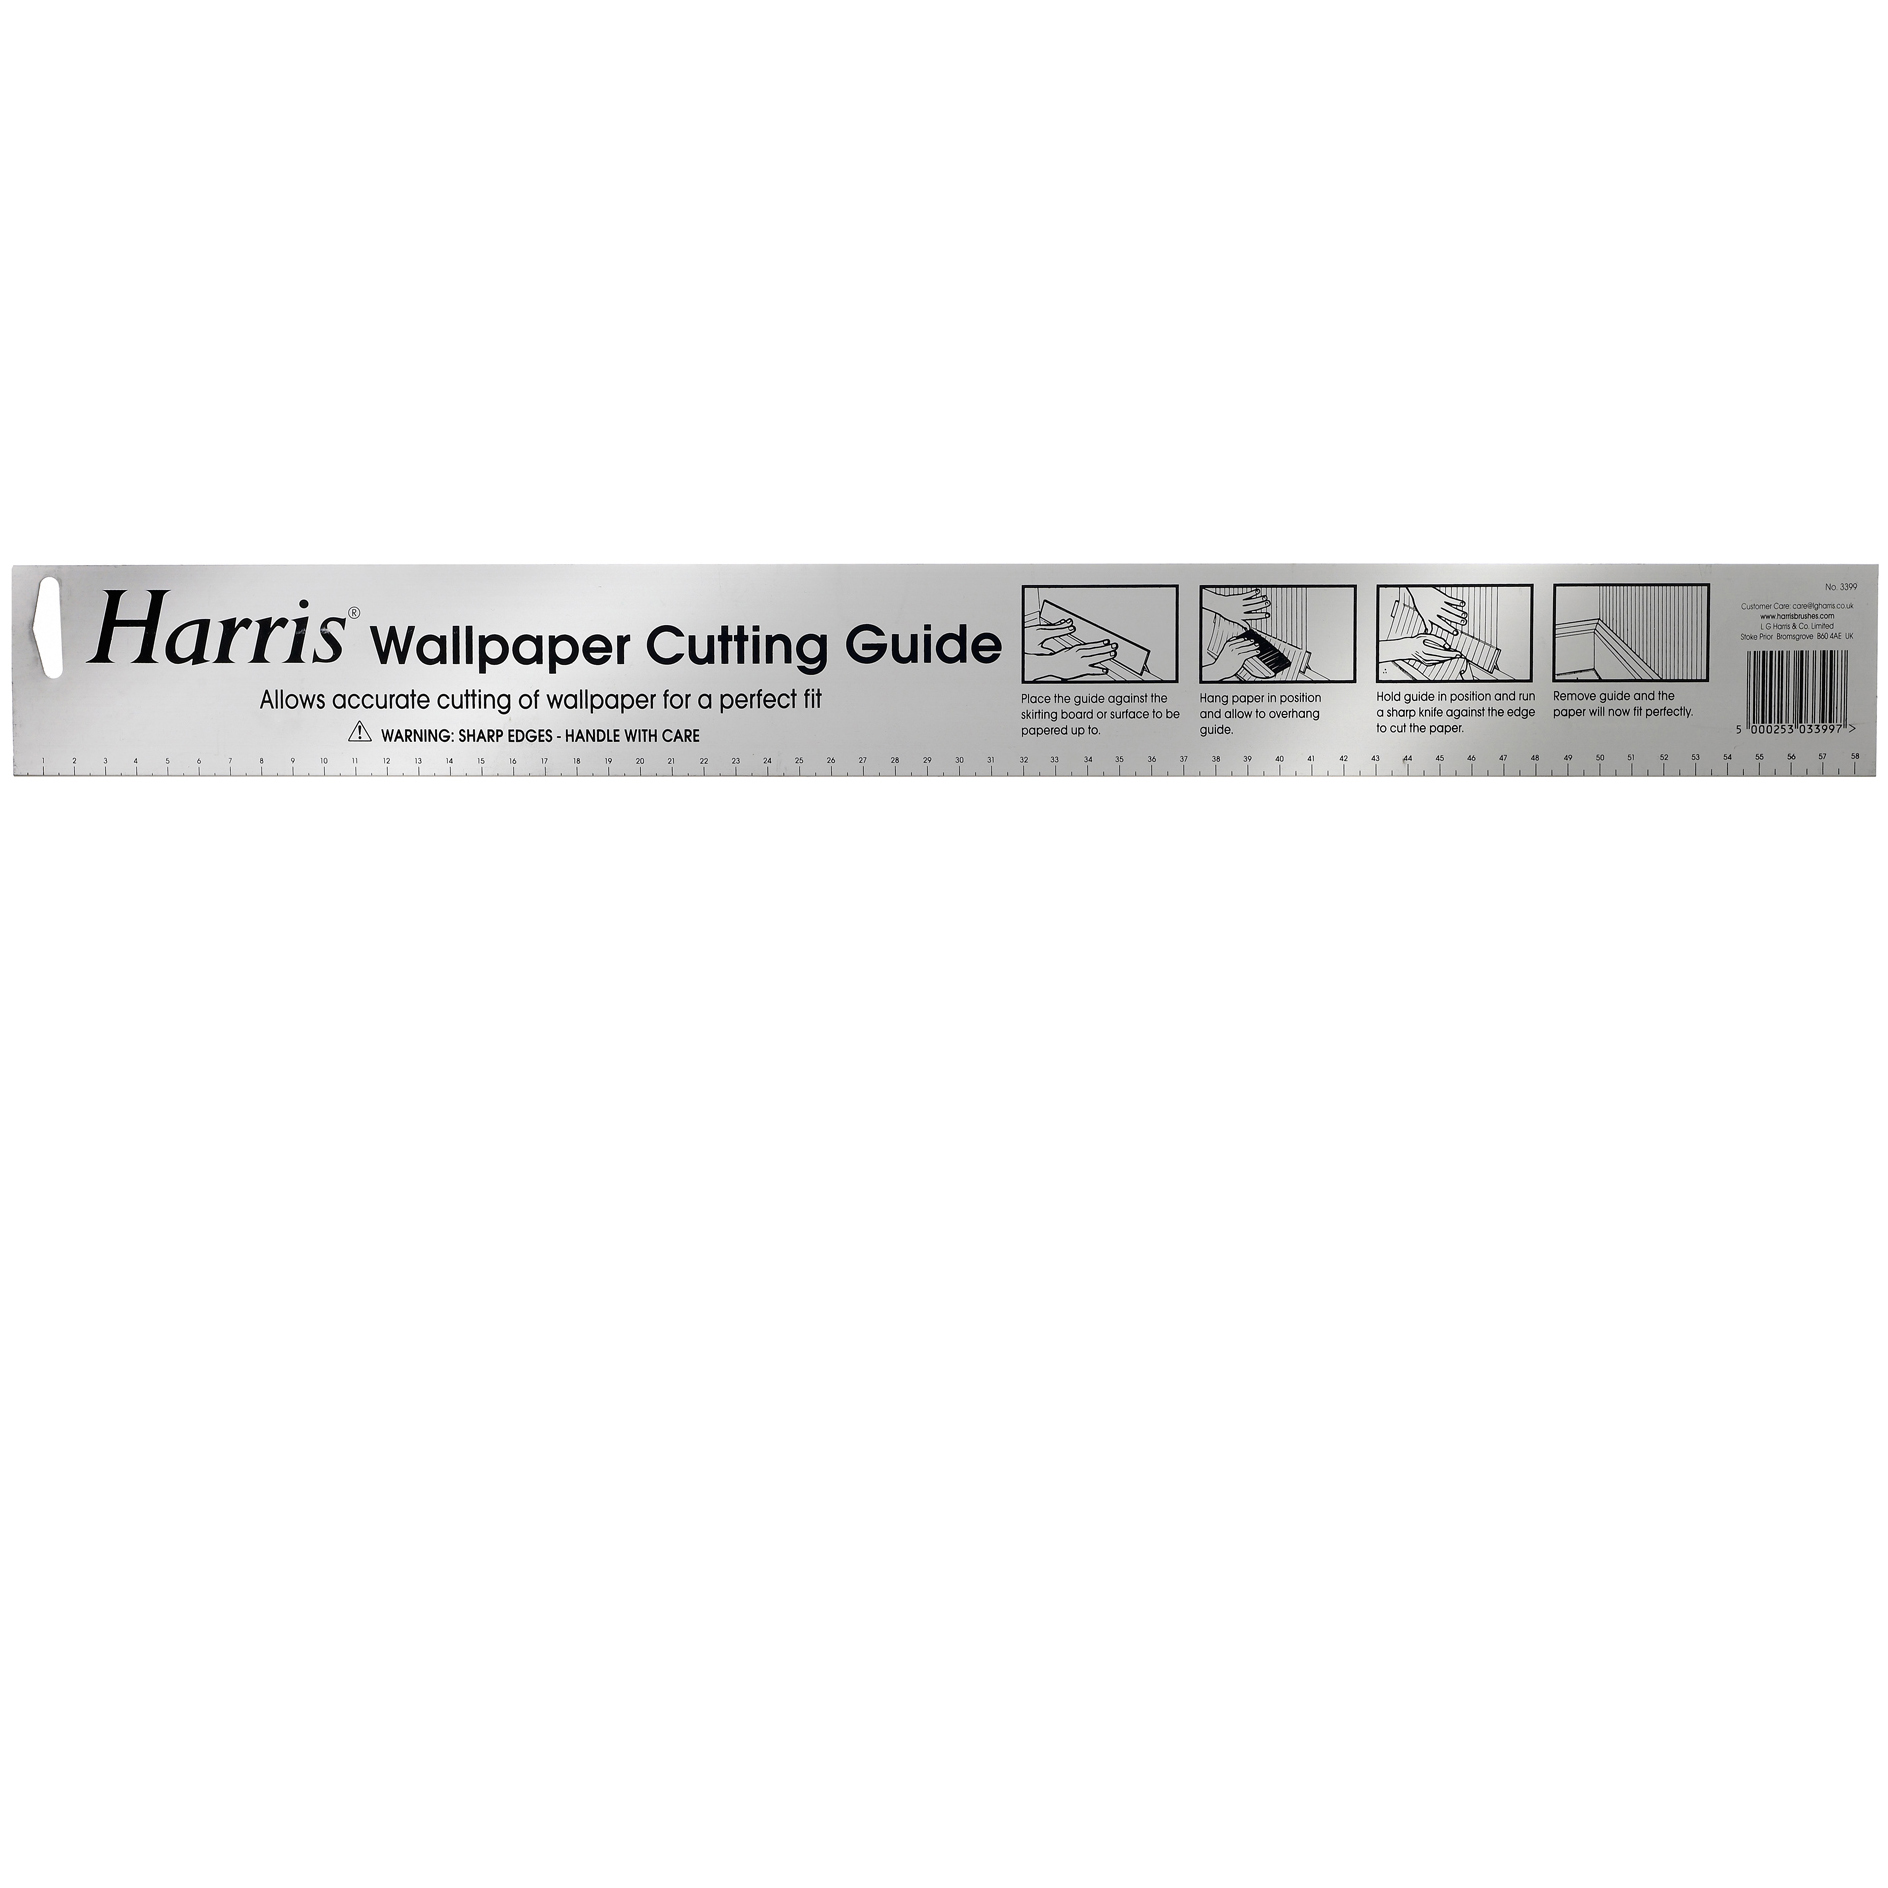 How to cut wallpaper correctly  Wallpapering Instructions  Wallpaper from  the 70s